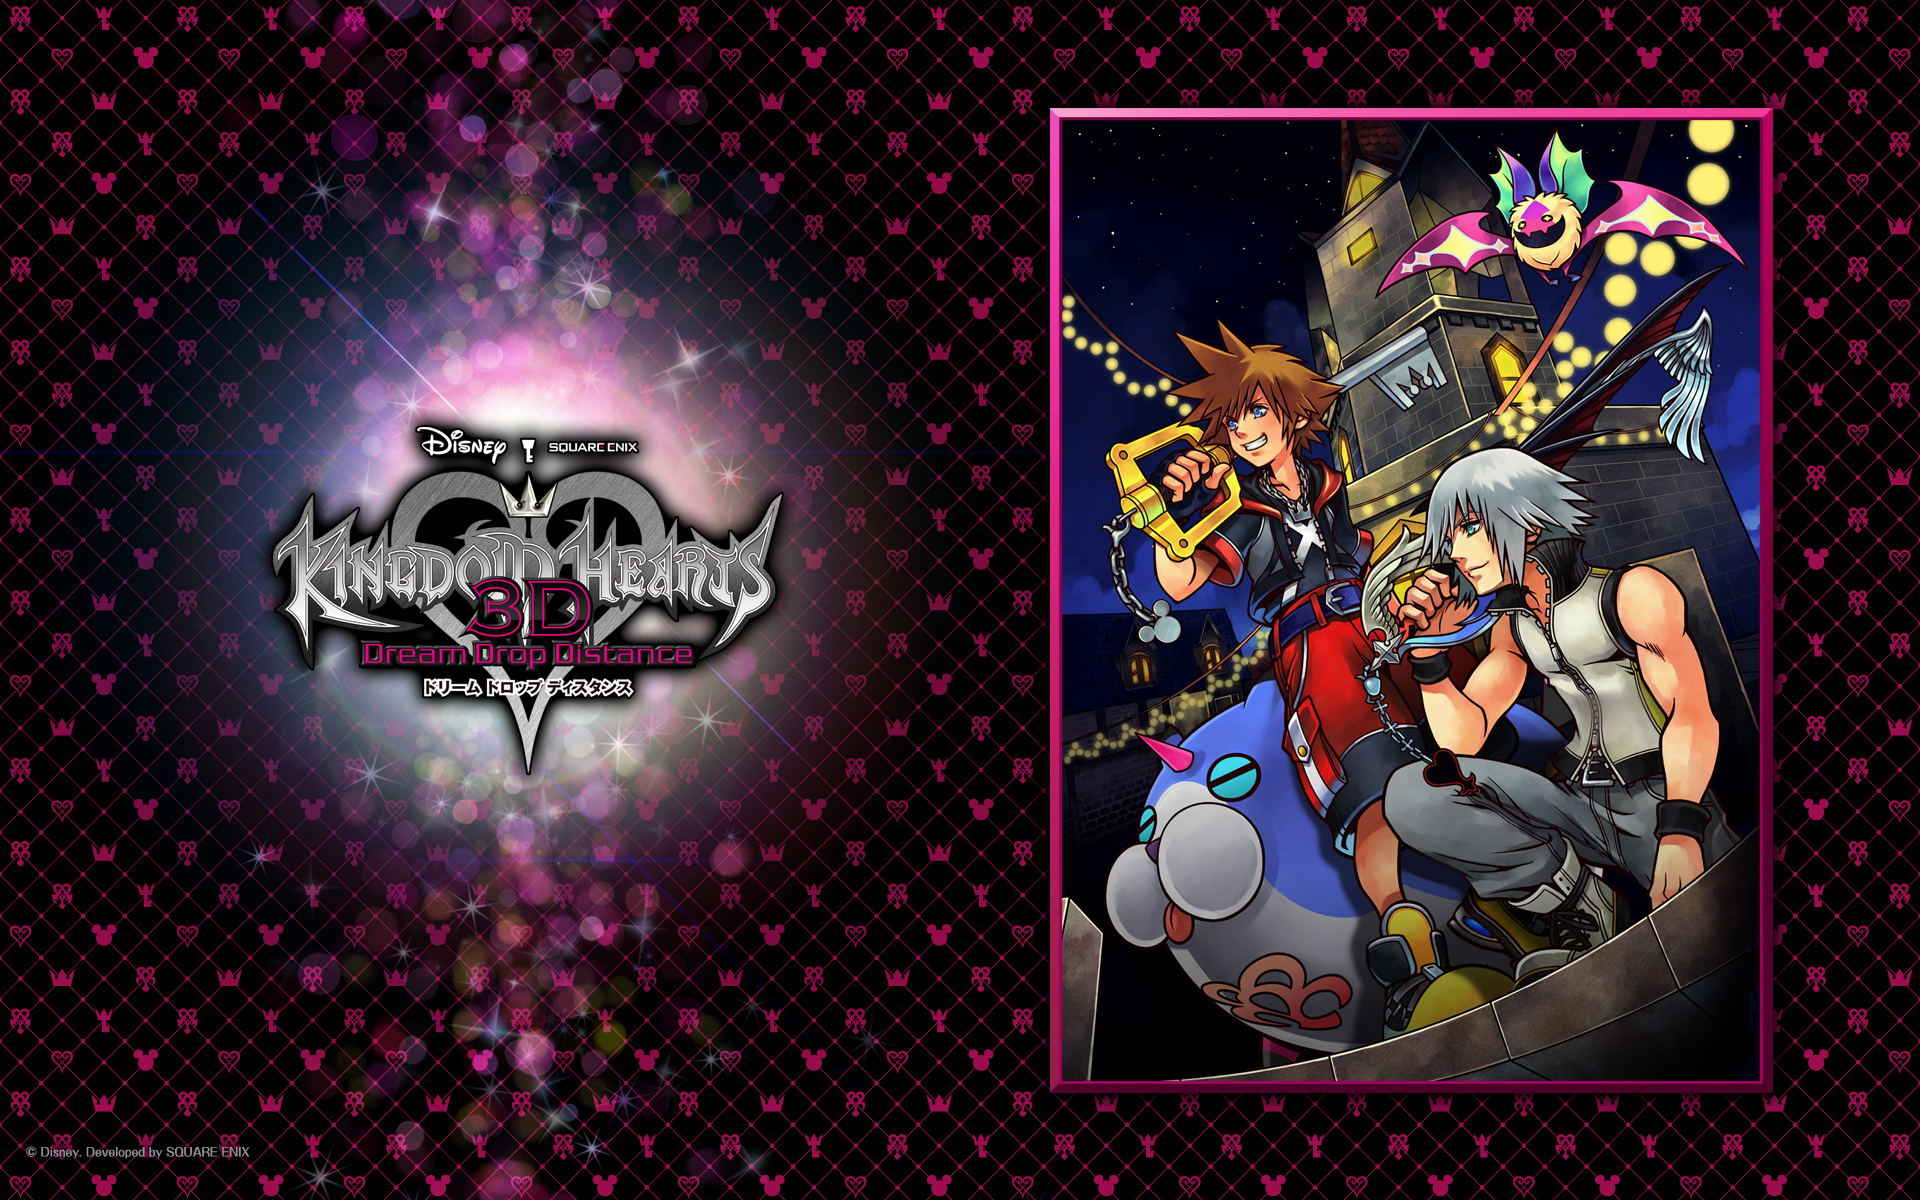 Kh 2.8 Wallpapers